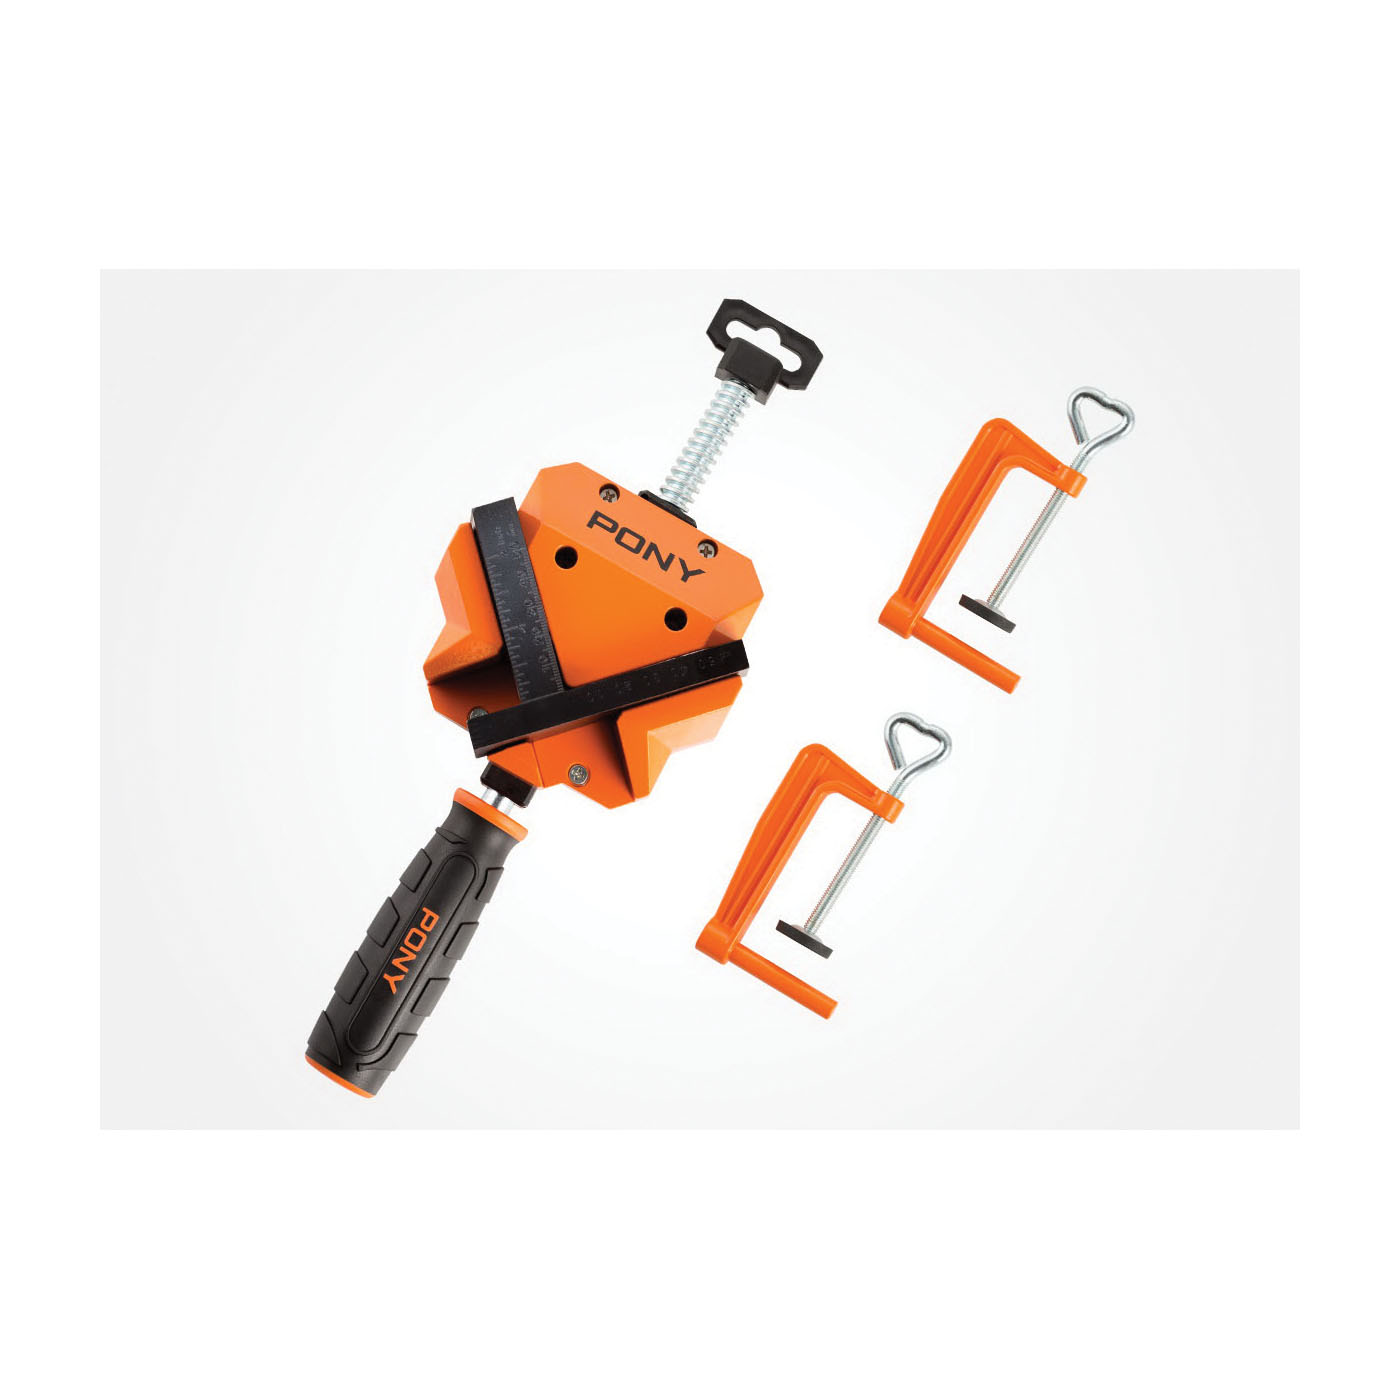 9180 Angle Clamp, 150 lb Clamping, 1-1/8 in Max Opening Size, 2 in D Throat, Steel Body, Orange Body